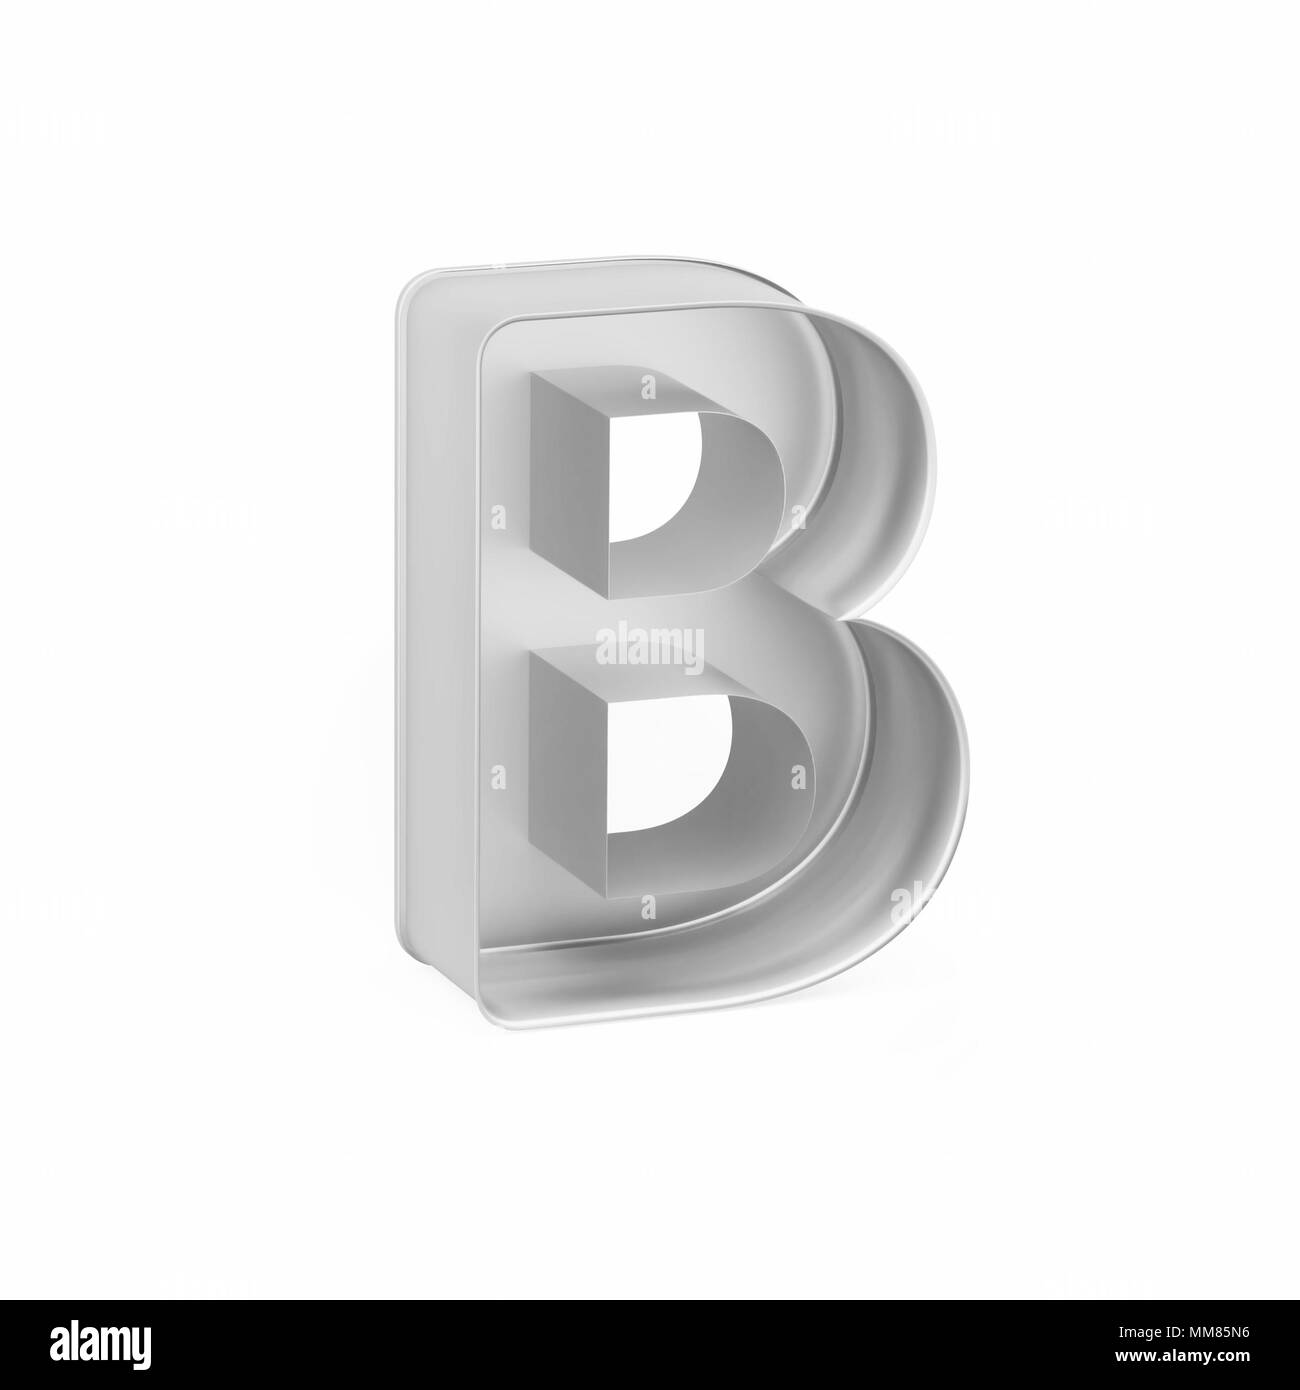 Metal baking cake pan or cookie cutter like capital letter B on white background, 3D rendered font image Stock Photo